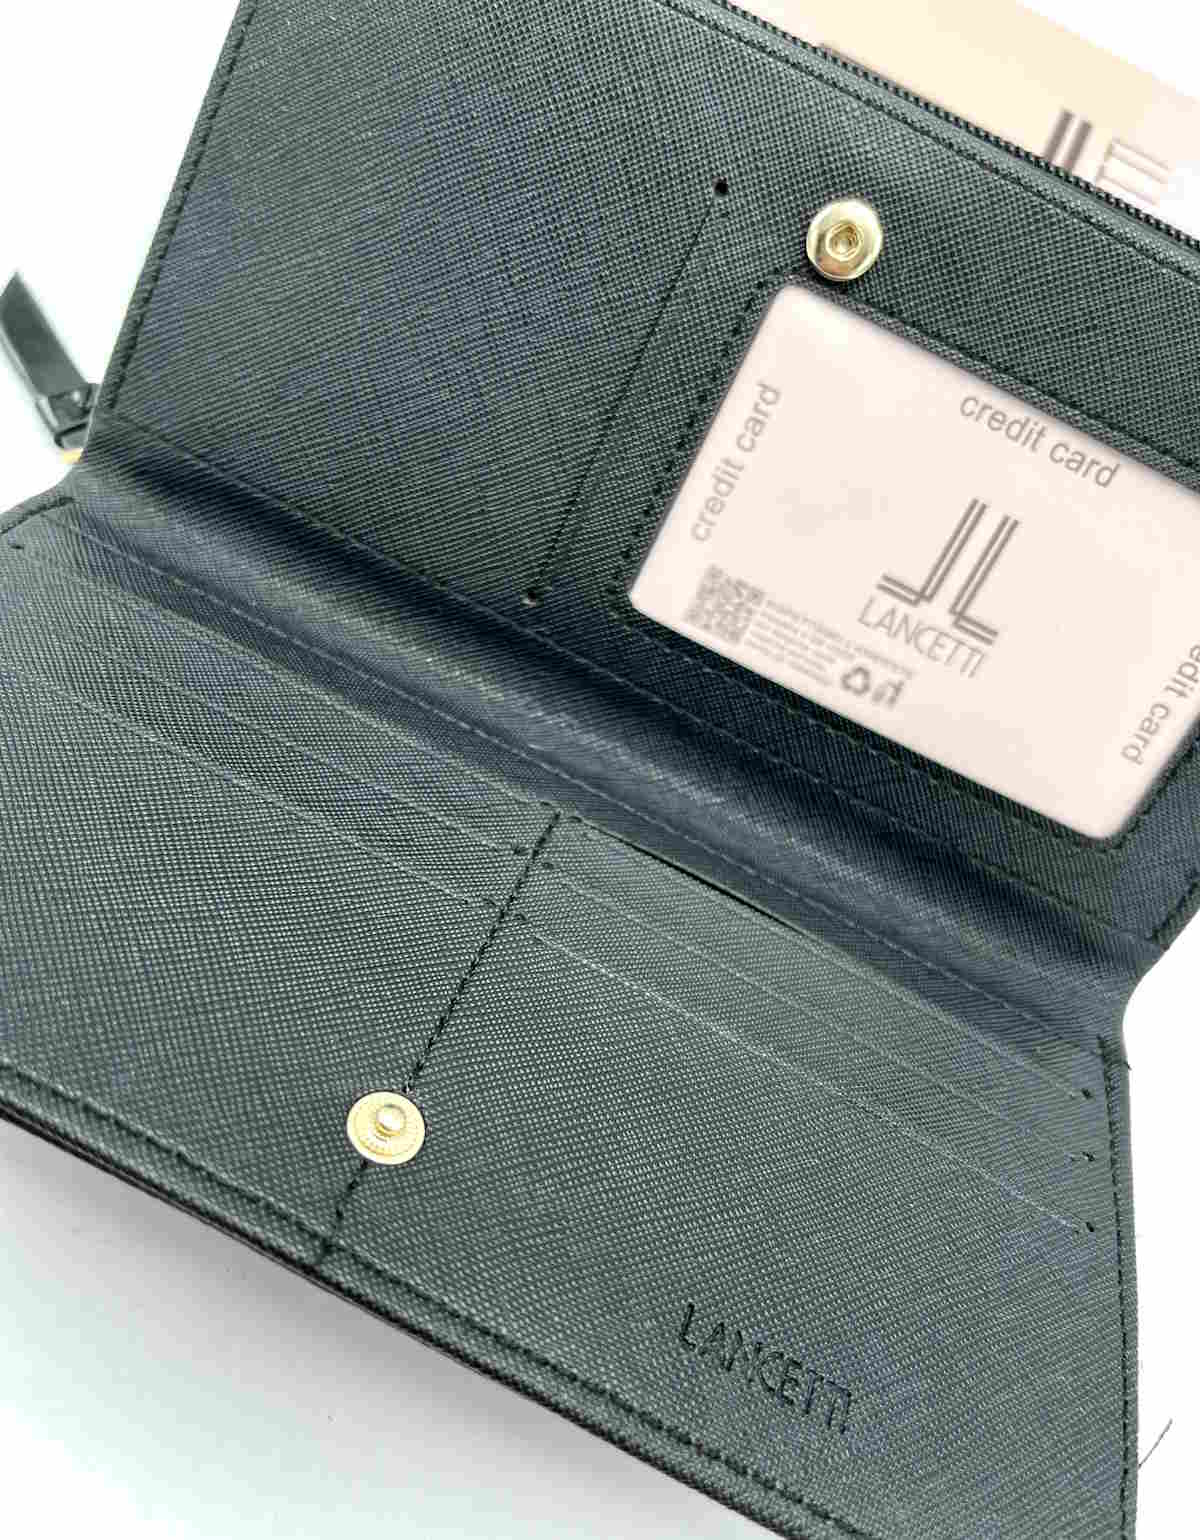 Eco leather wallet, brand Lancetti, art. LL23508-67